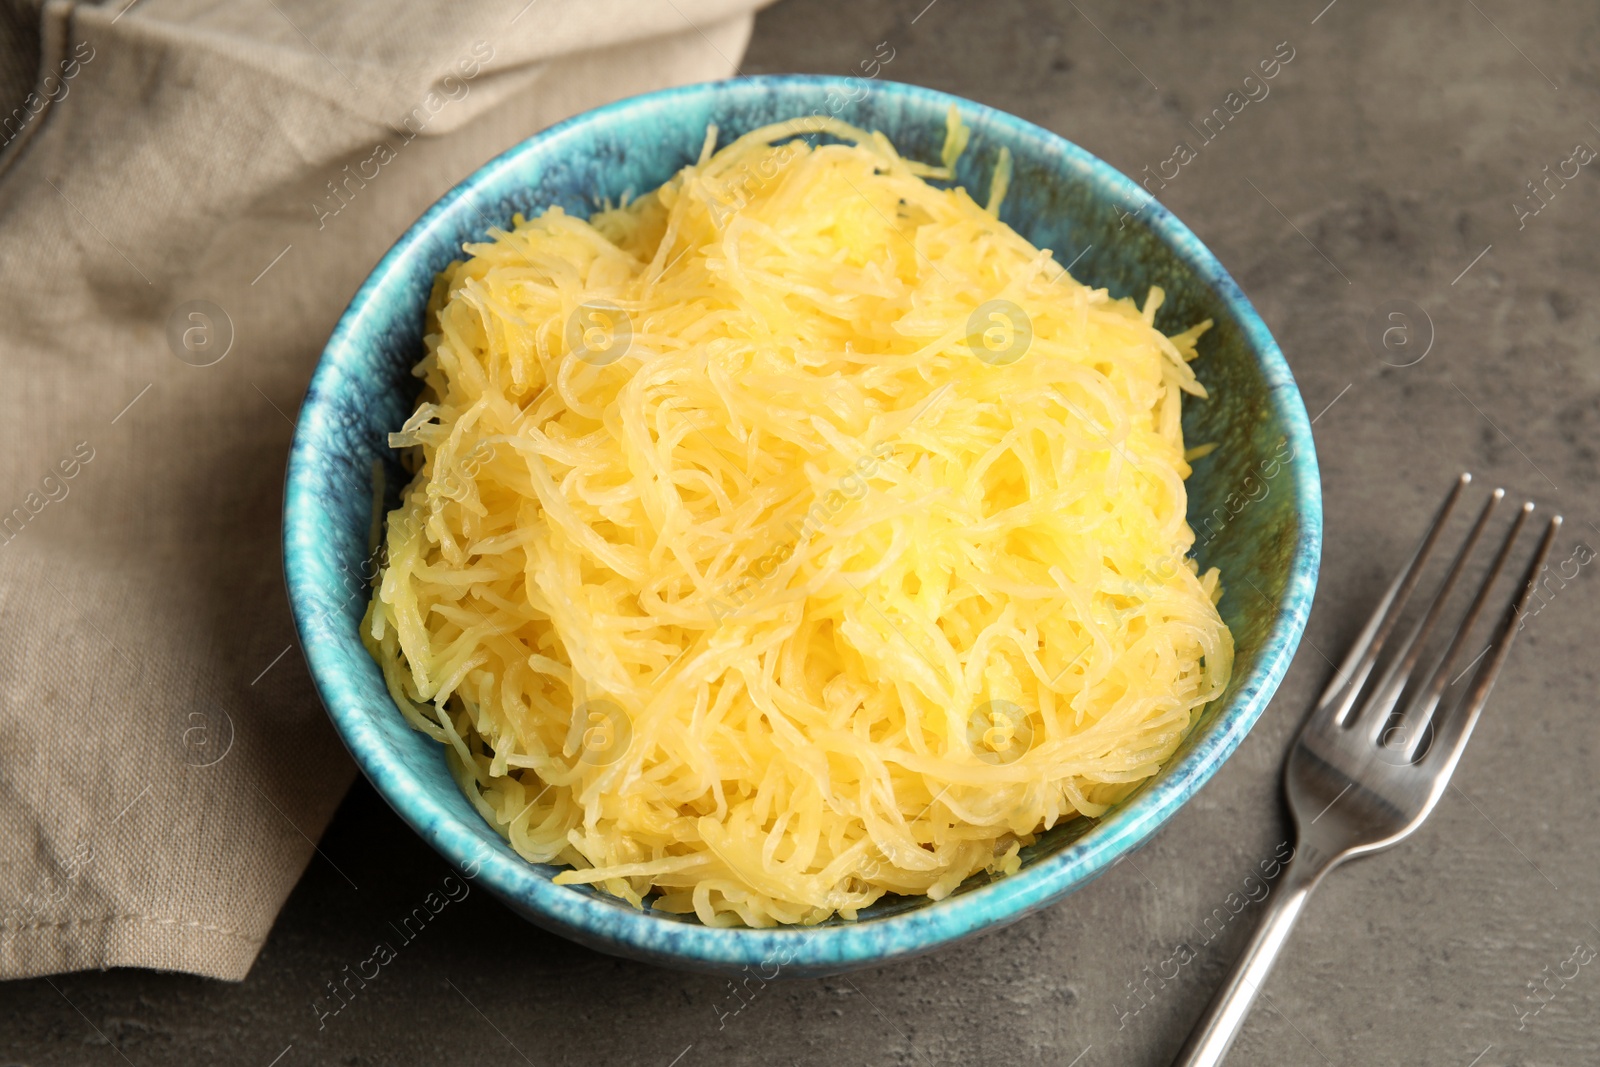 Photo of Cooked spaghetti squash in bowl on table